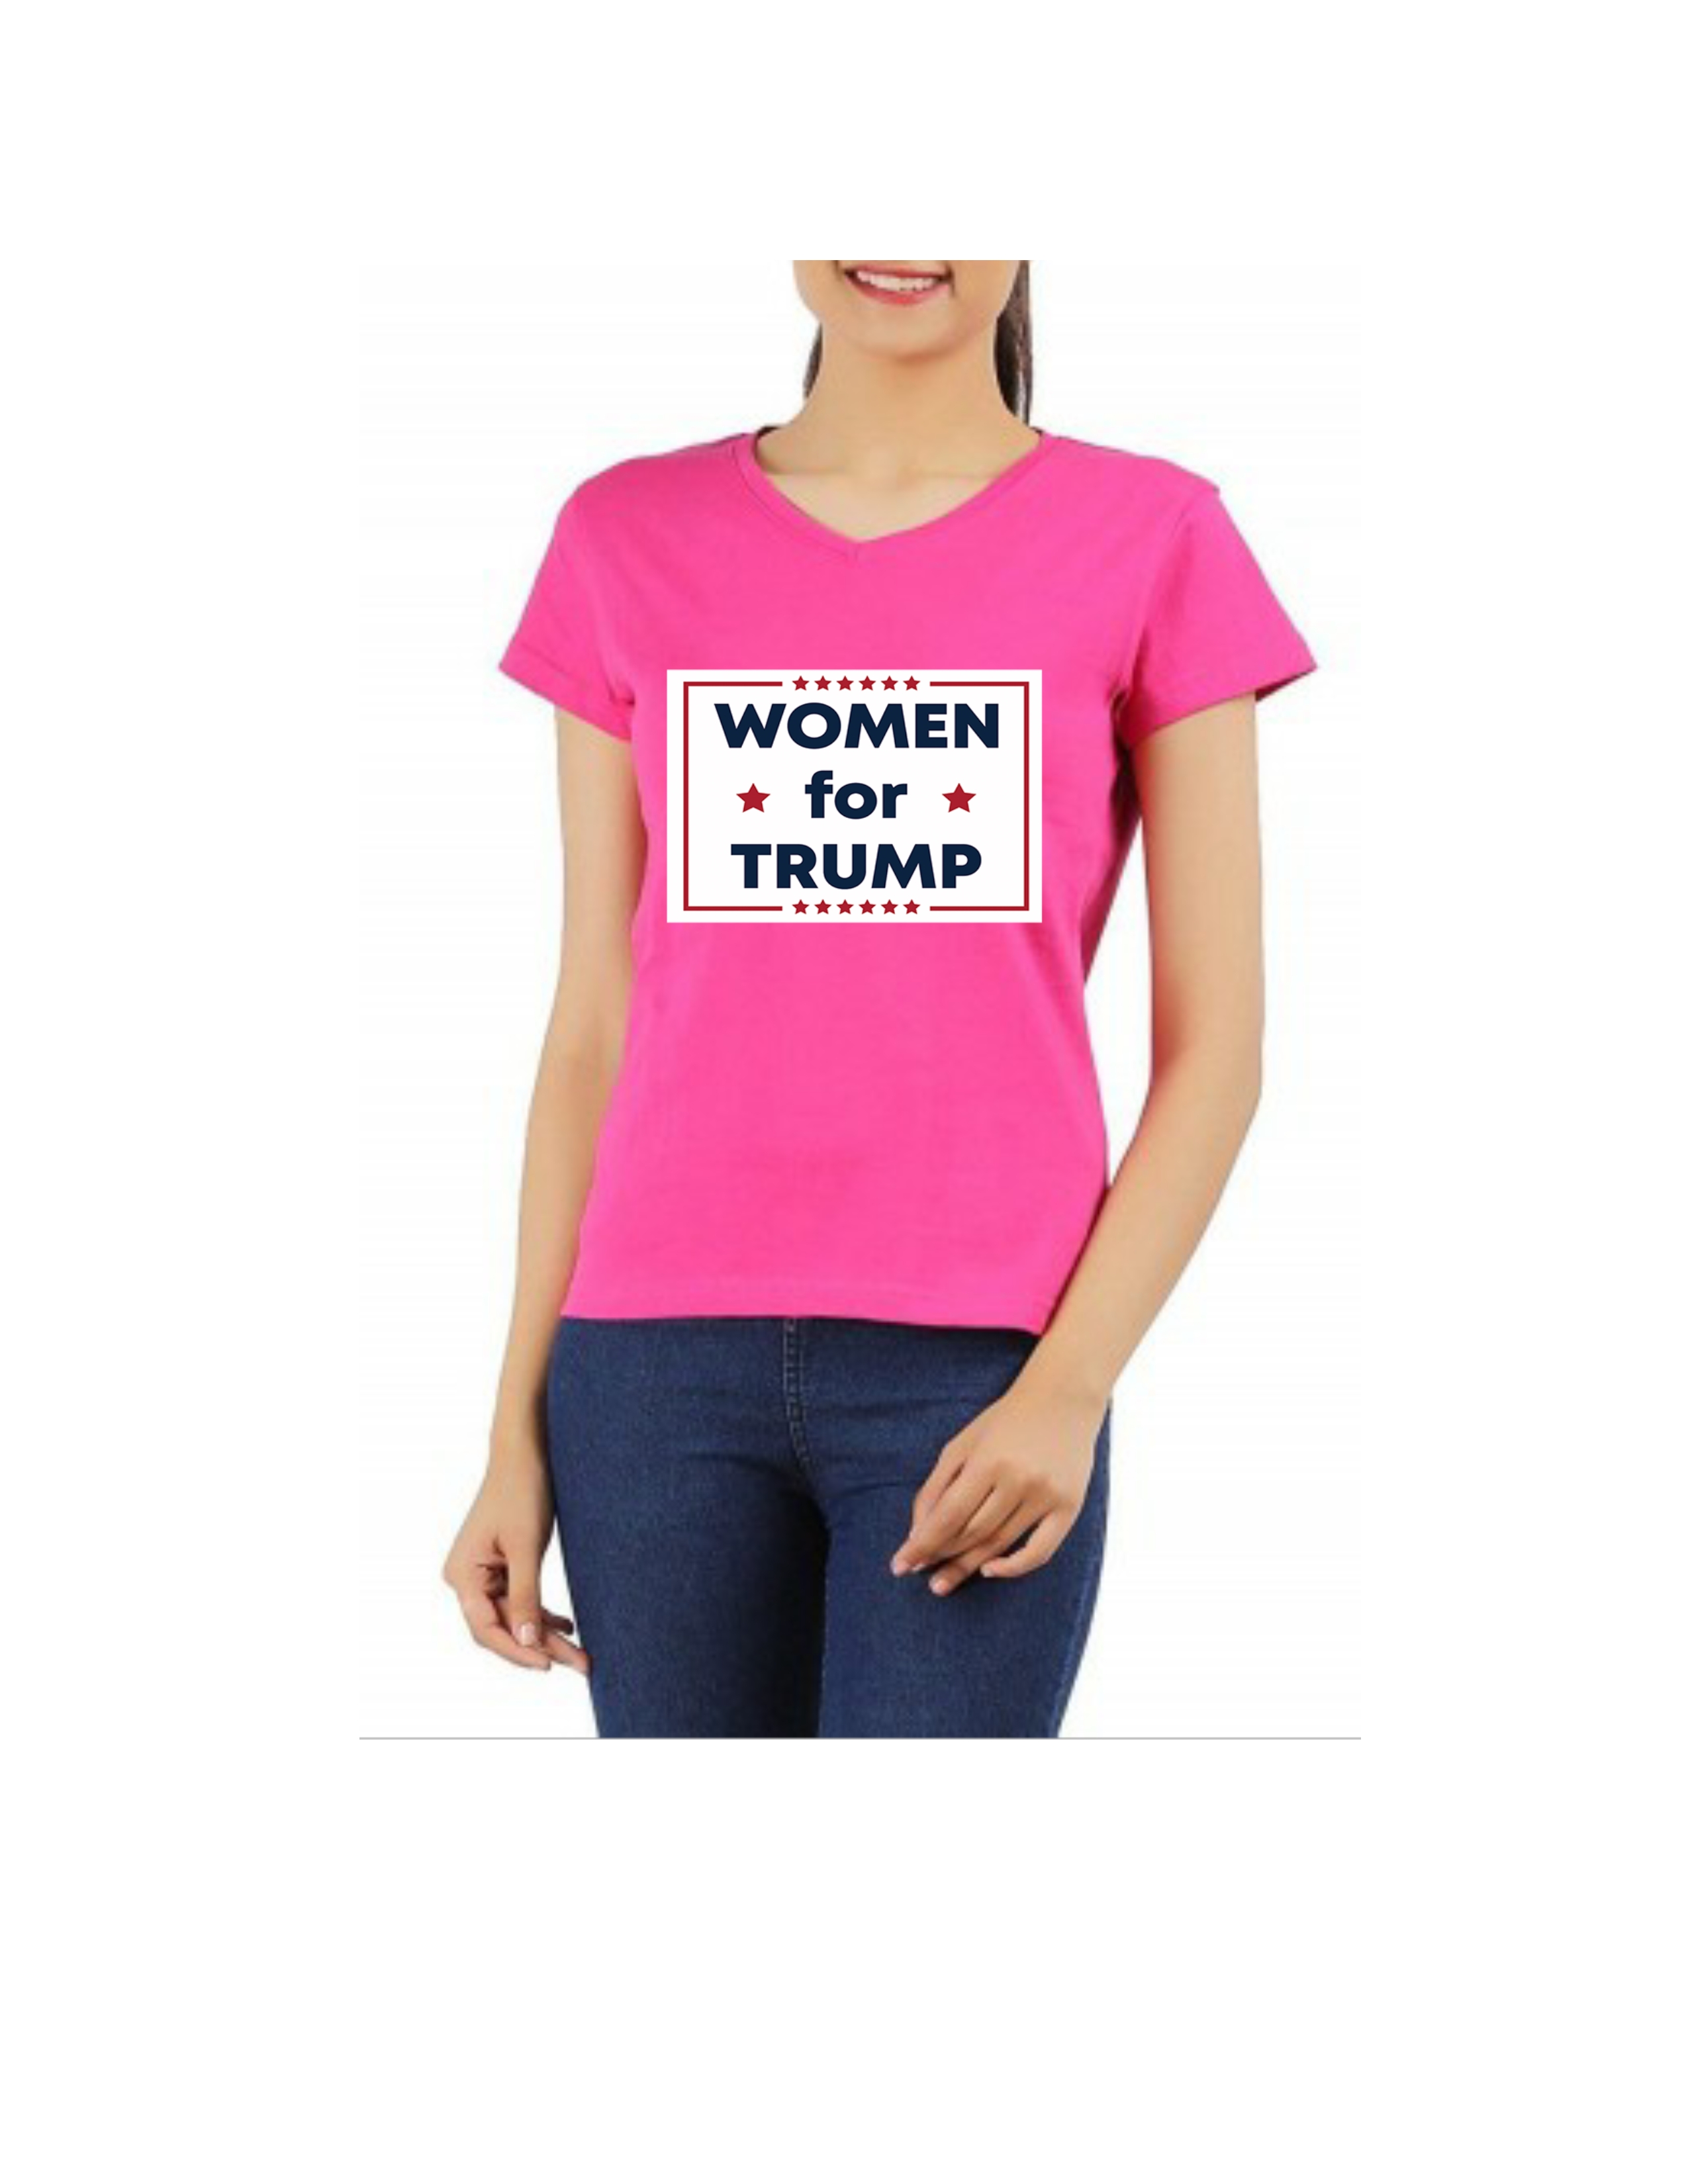 woman for trump t shirt